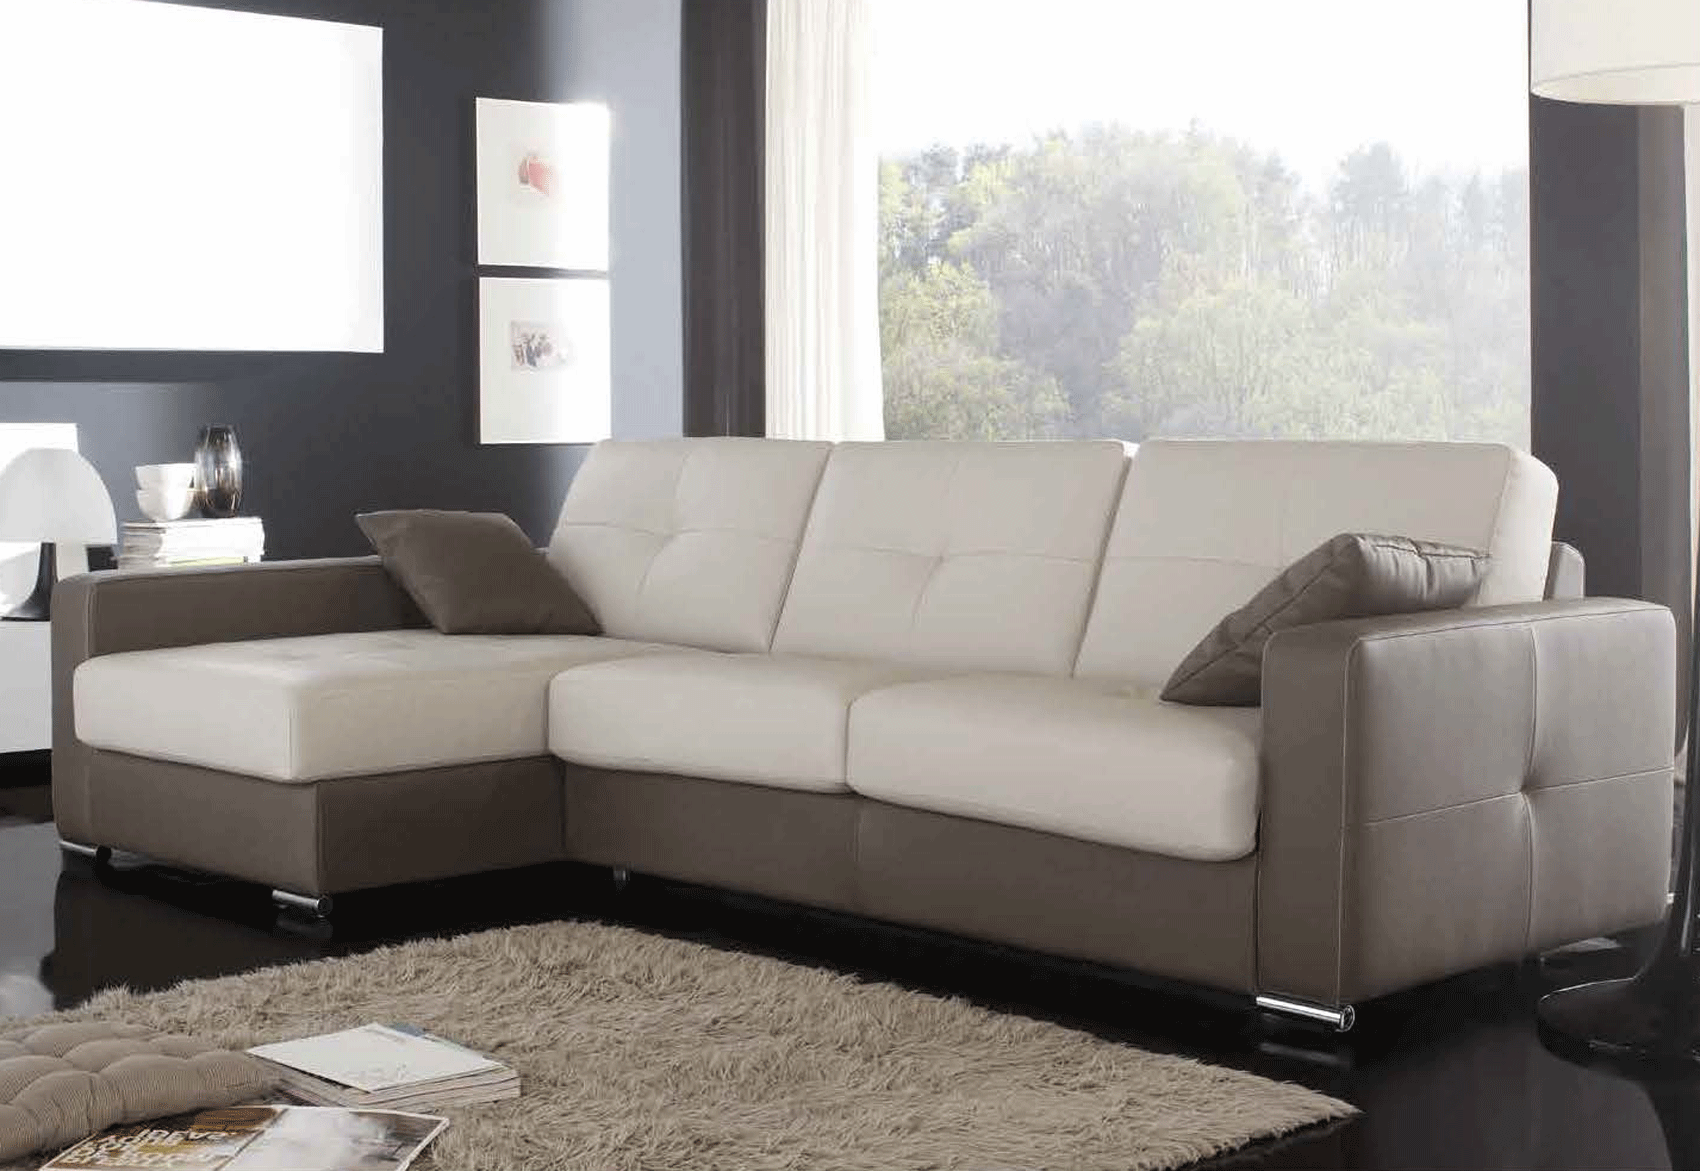 Living Room Furniture Sofas Loveseats and Chairs Sleep Living